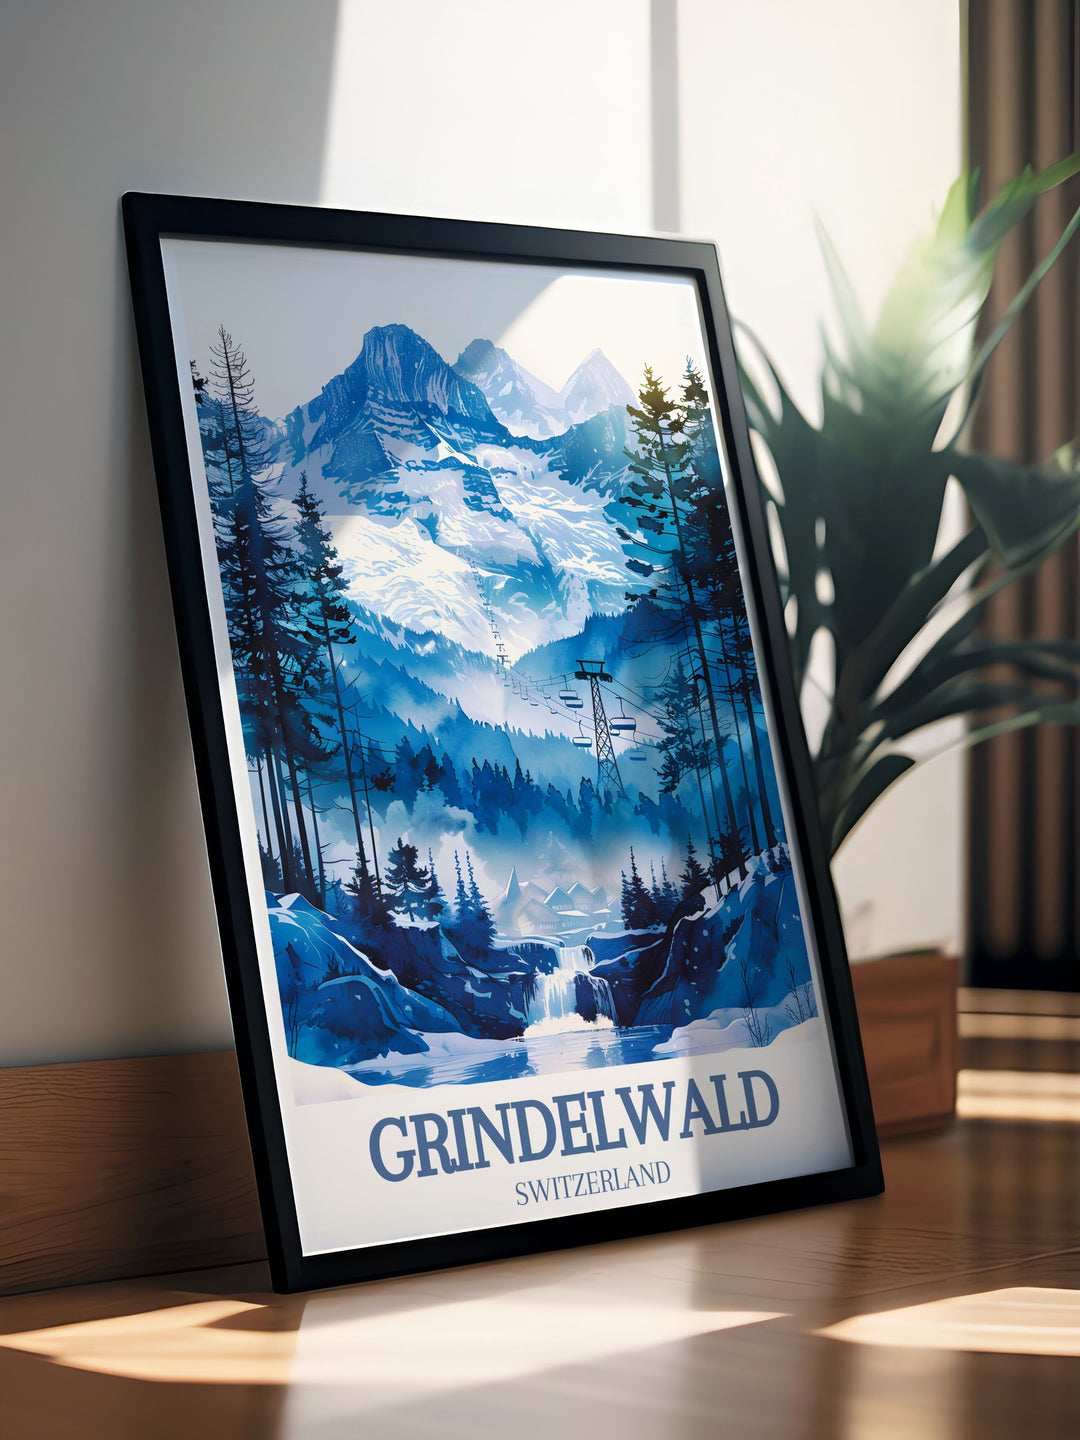 This travel poster of Grindelwald depicts the serene beauty of the Swiss Alps, with detailed illustrations of the village and surrounding landscapes, perfect for enhancing your home decor.